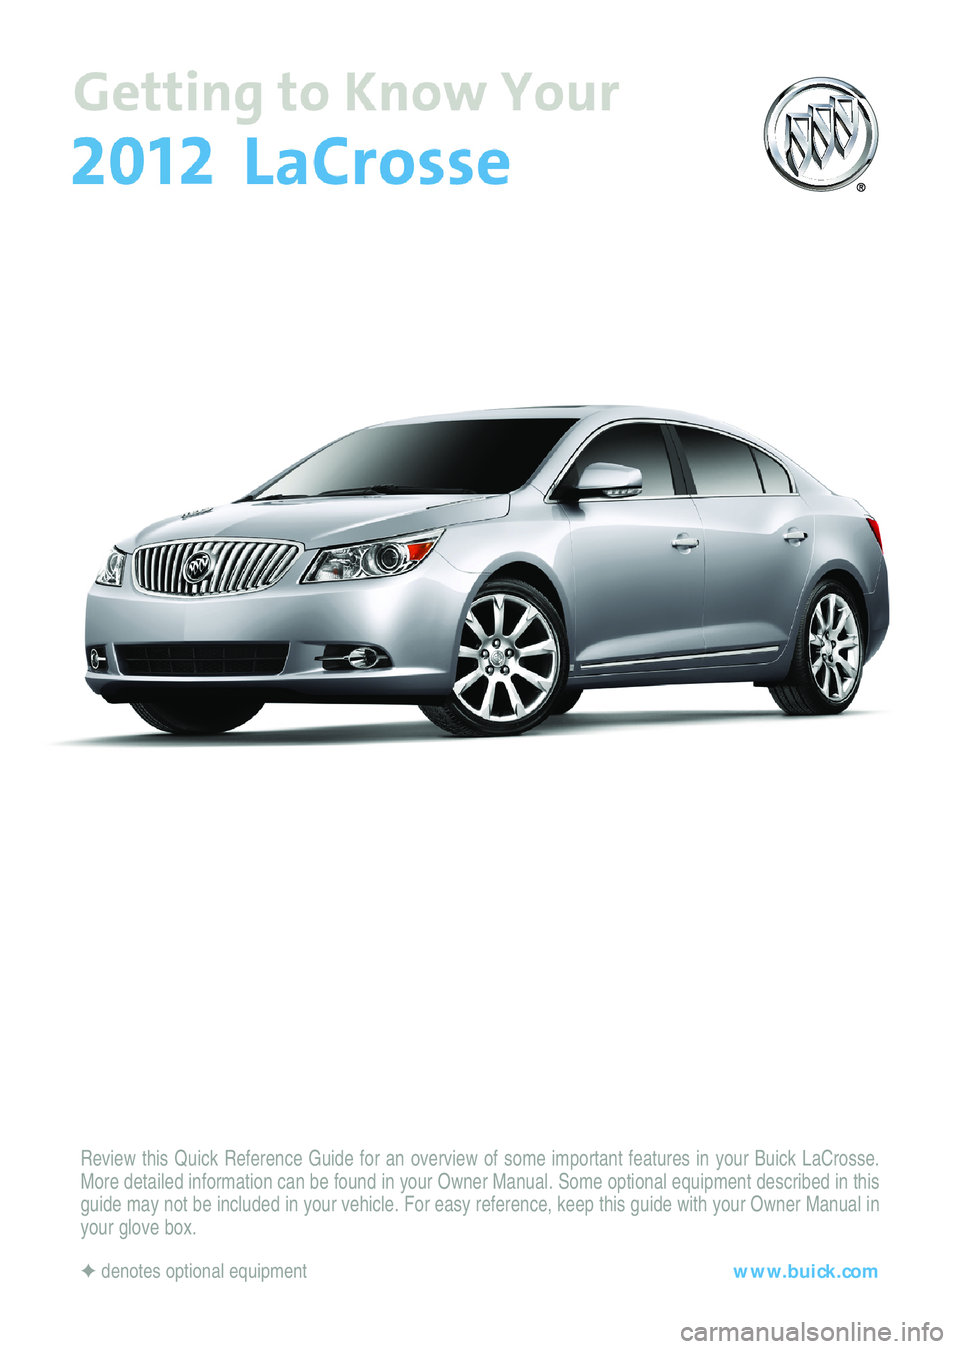 BUICK LACROSSE 2012  Get To Know Guide Review this Quick Reference Guide for an overview of some important features in your Buick LaCrosse.
More detailed information can be found in your Owner Manual. Some optional equipment described in t